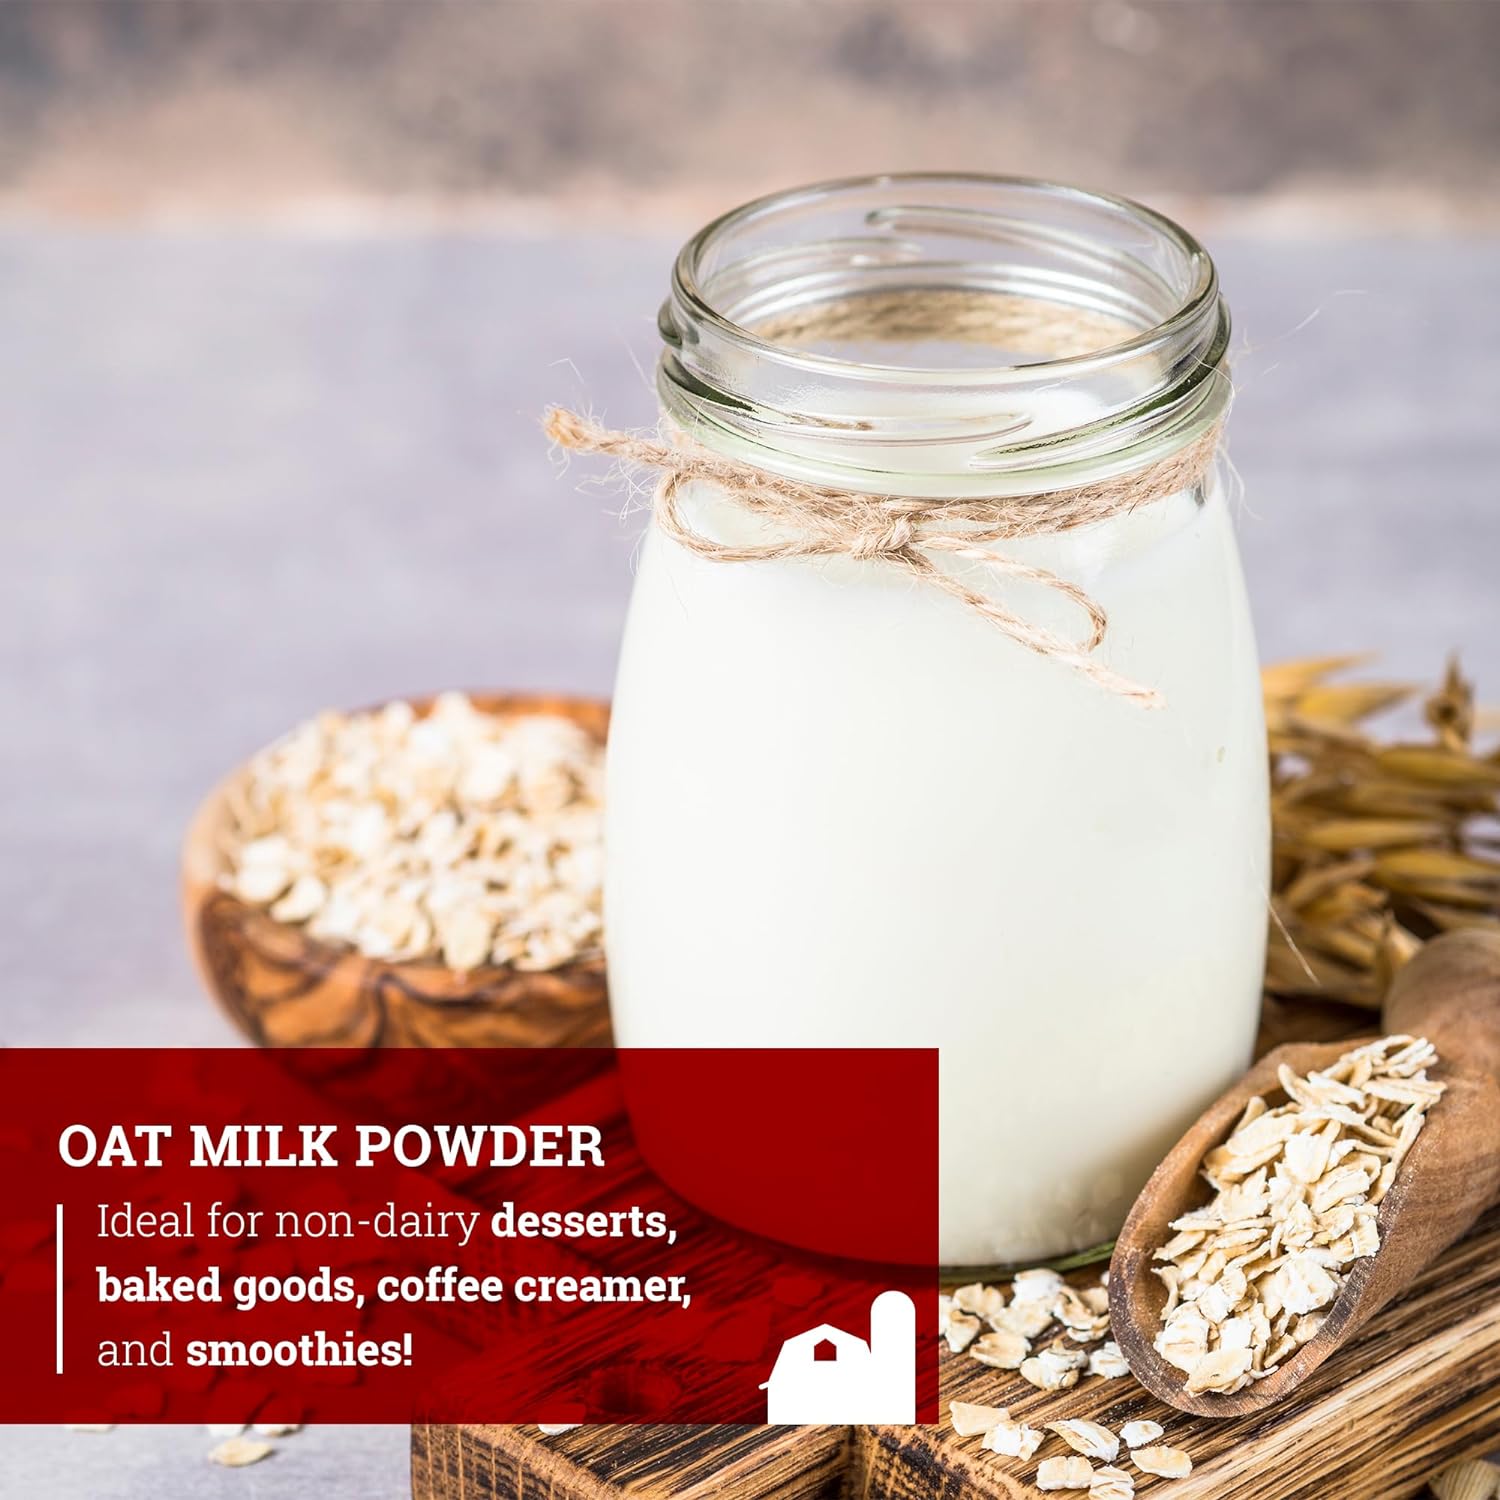 Oat Milk Powder by Hoosier Hill Farm, 25LB BULK Bag (Pack of 1). Made in USA with no additives : Grocery & Gourmet Food